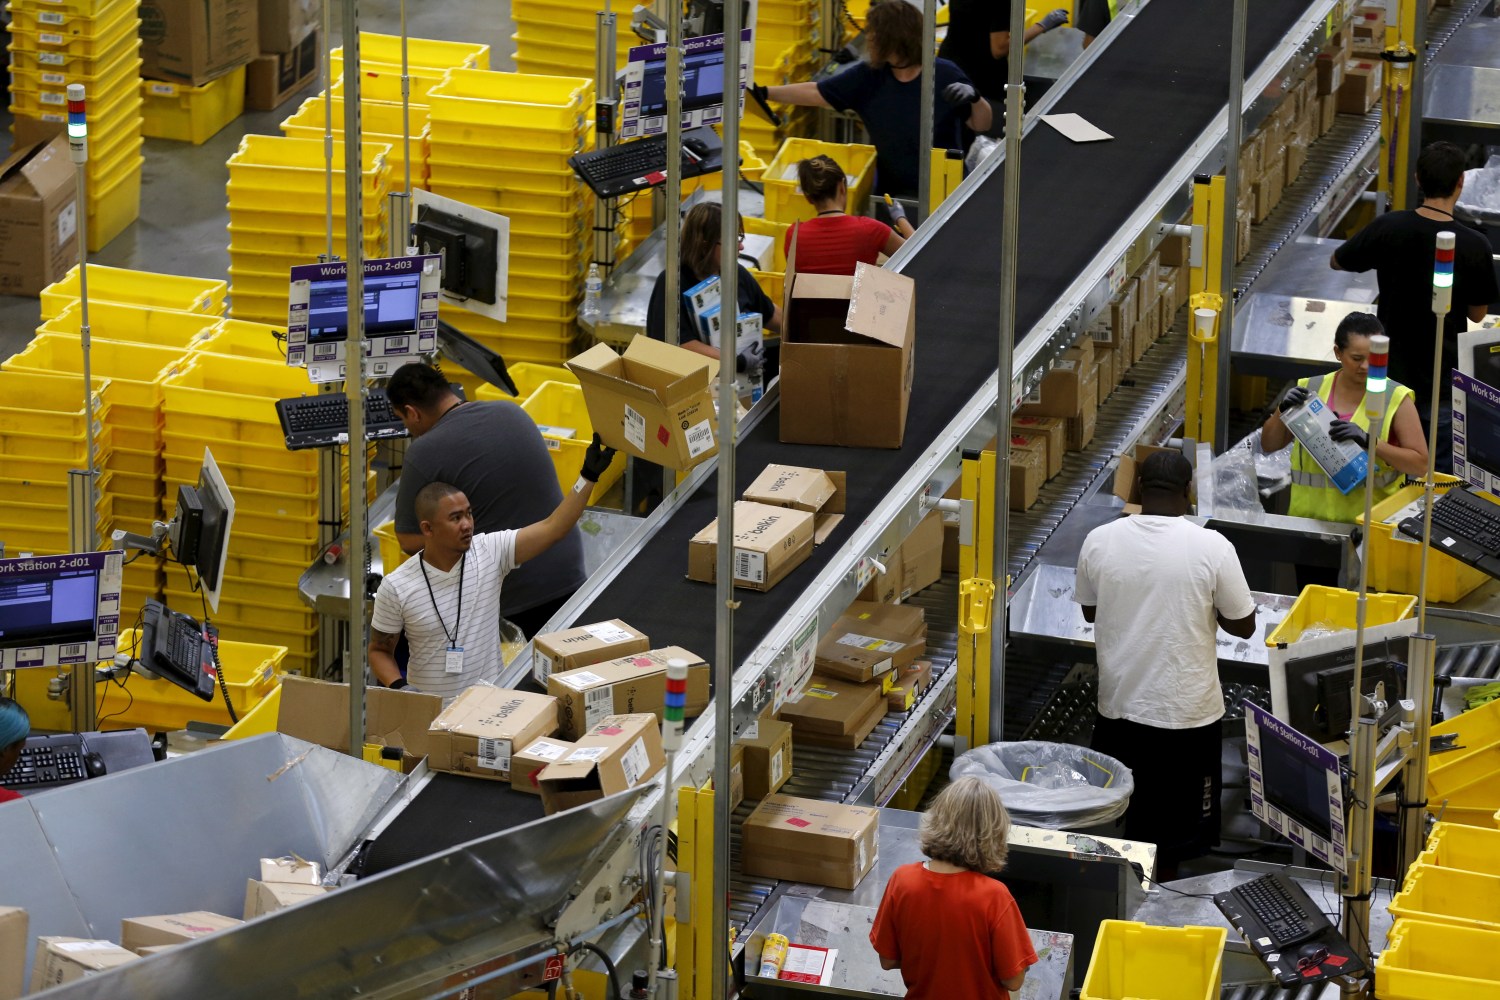 Workers sort arriving products at an Amazon Fulfilment Center in Tracy, California August 3, 2015. REUTERS/Robert Galbraith - GF20000012804